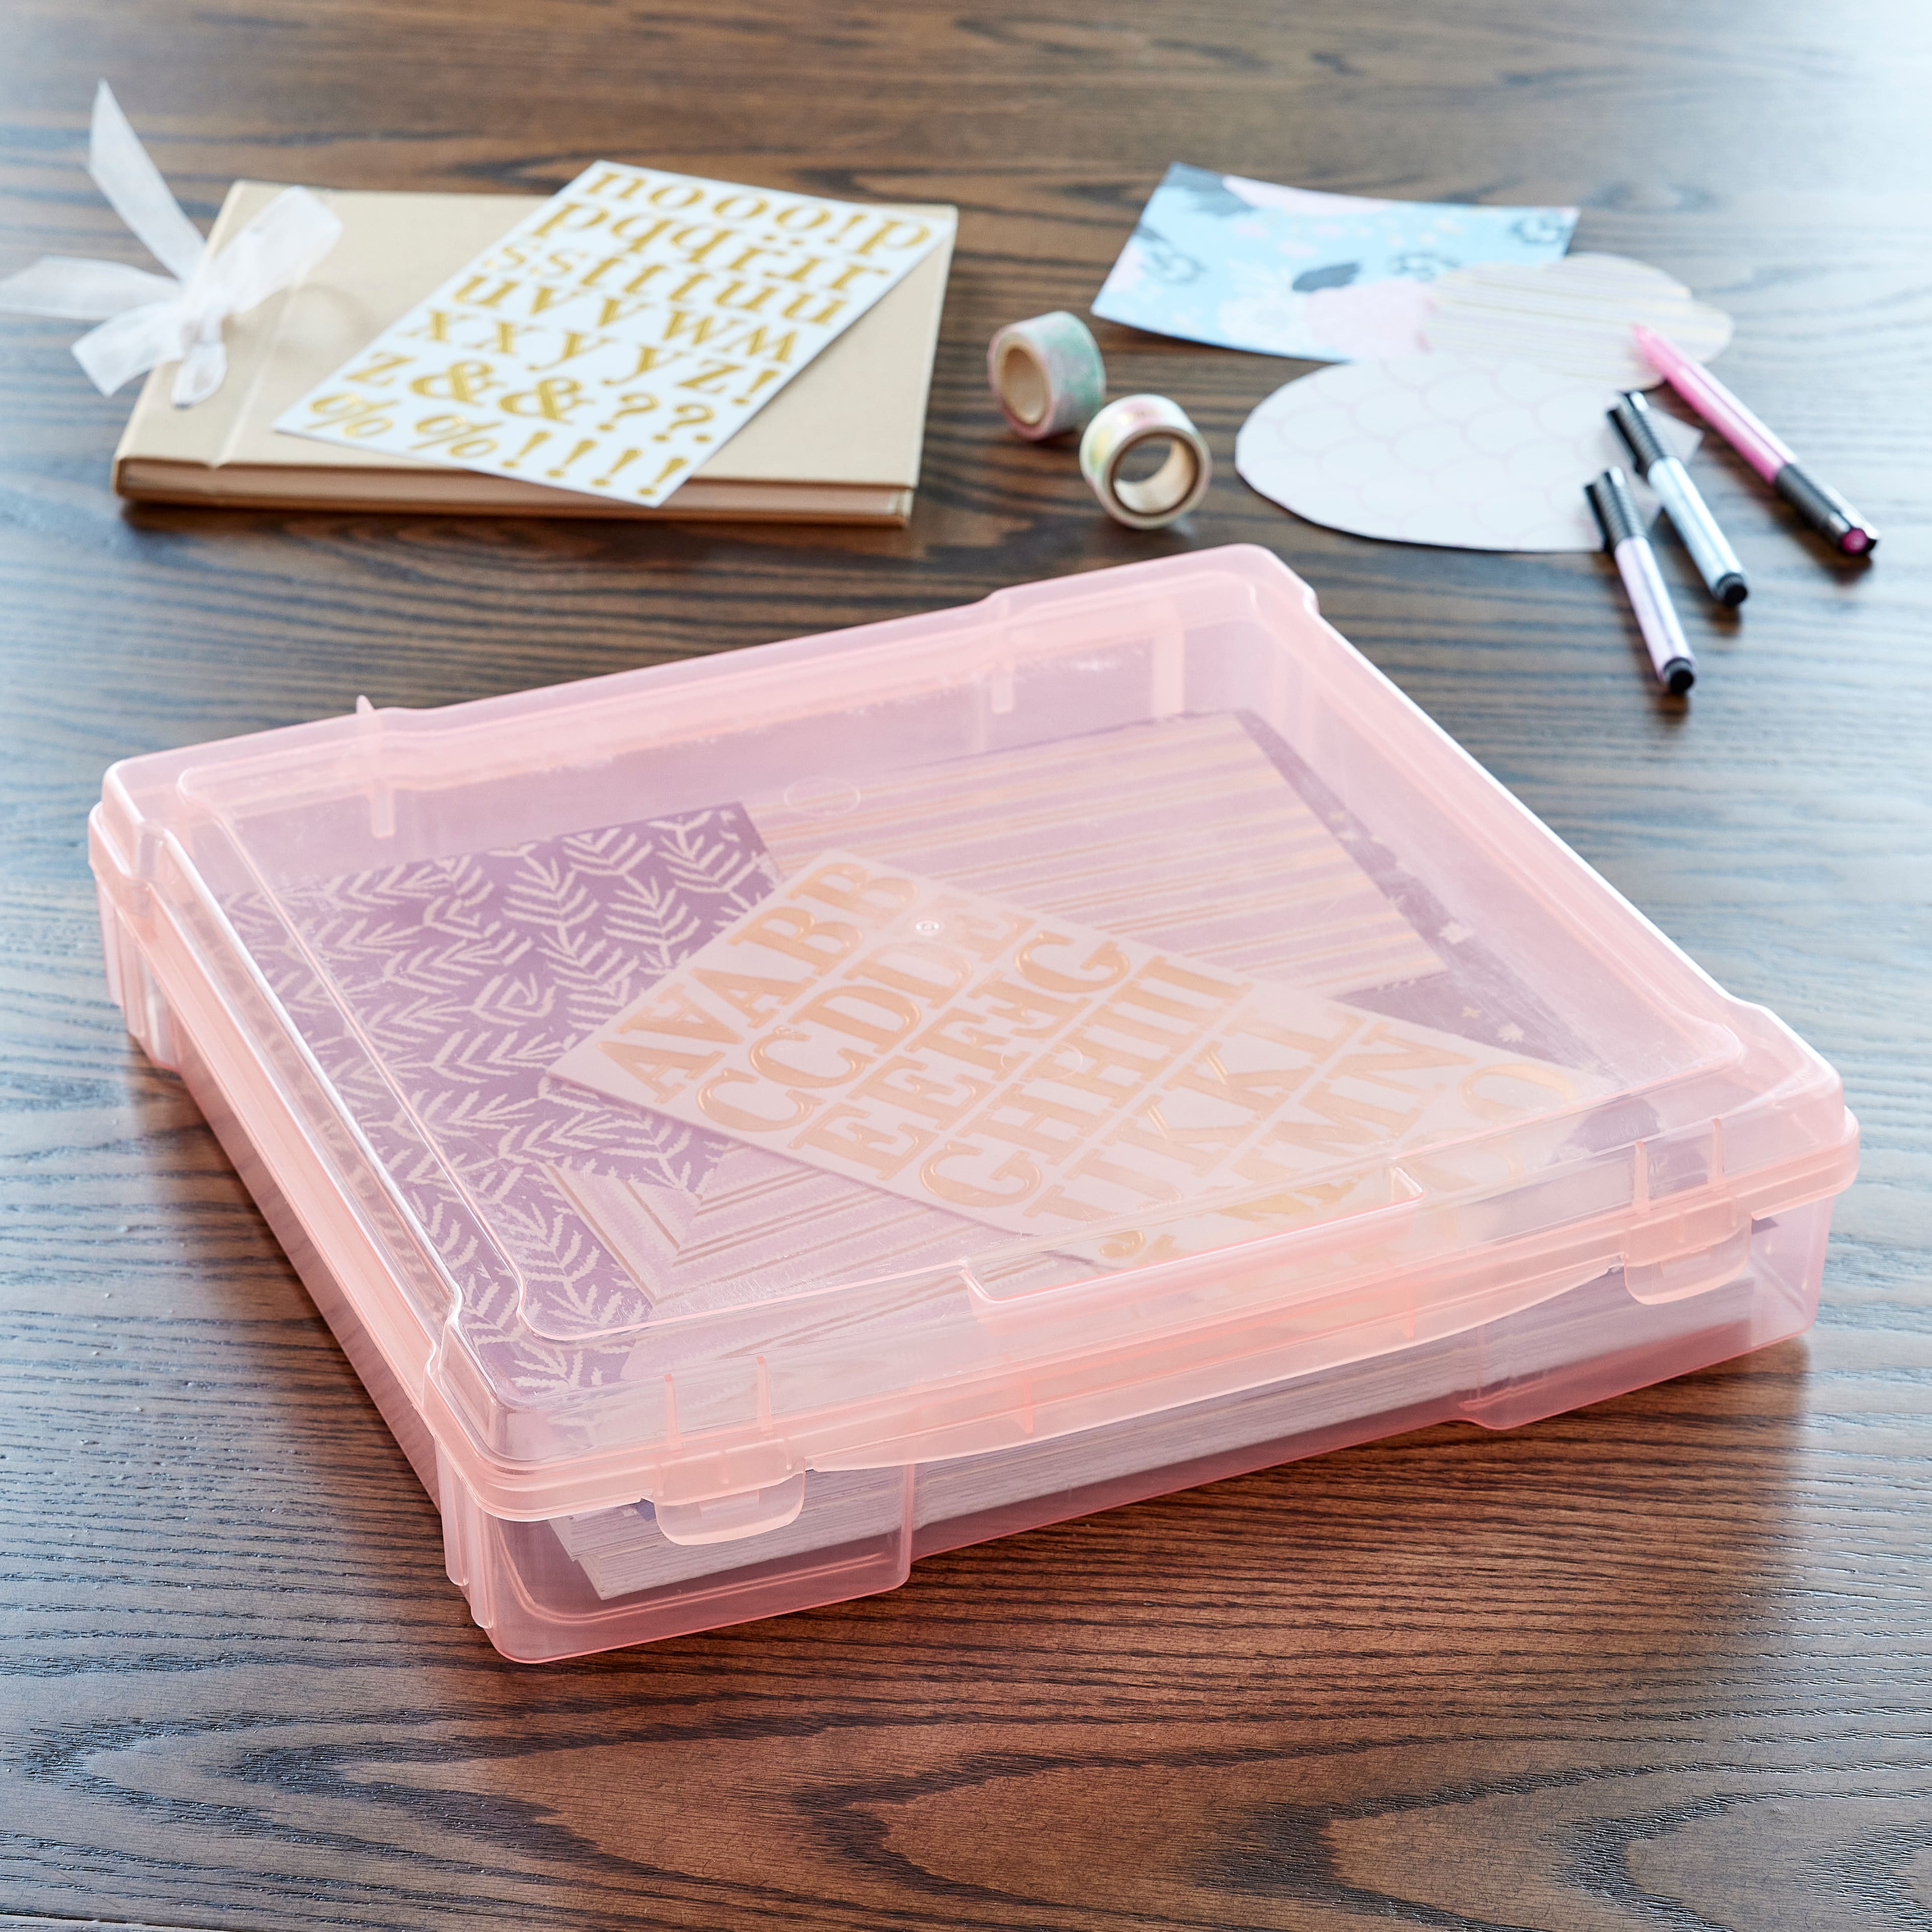 Michaels 12 x 12 Scrapbook Case by Simply Tidy